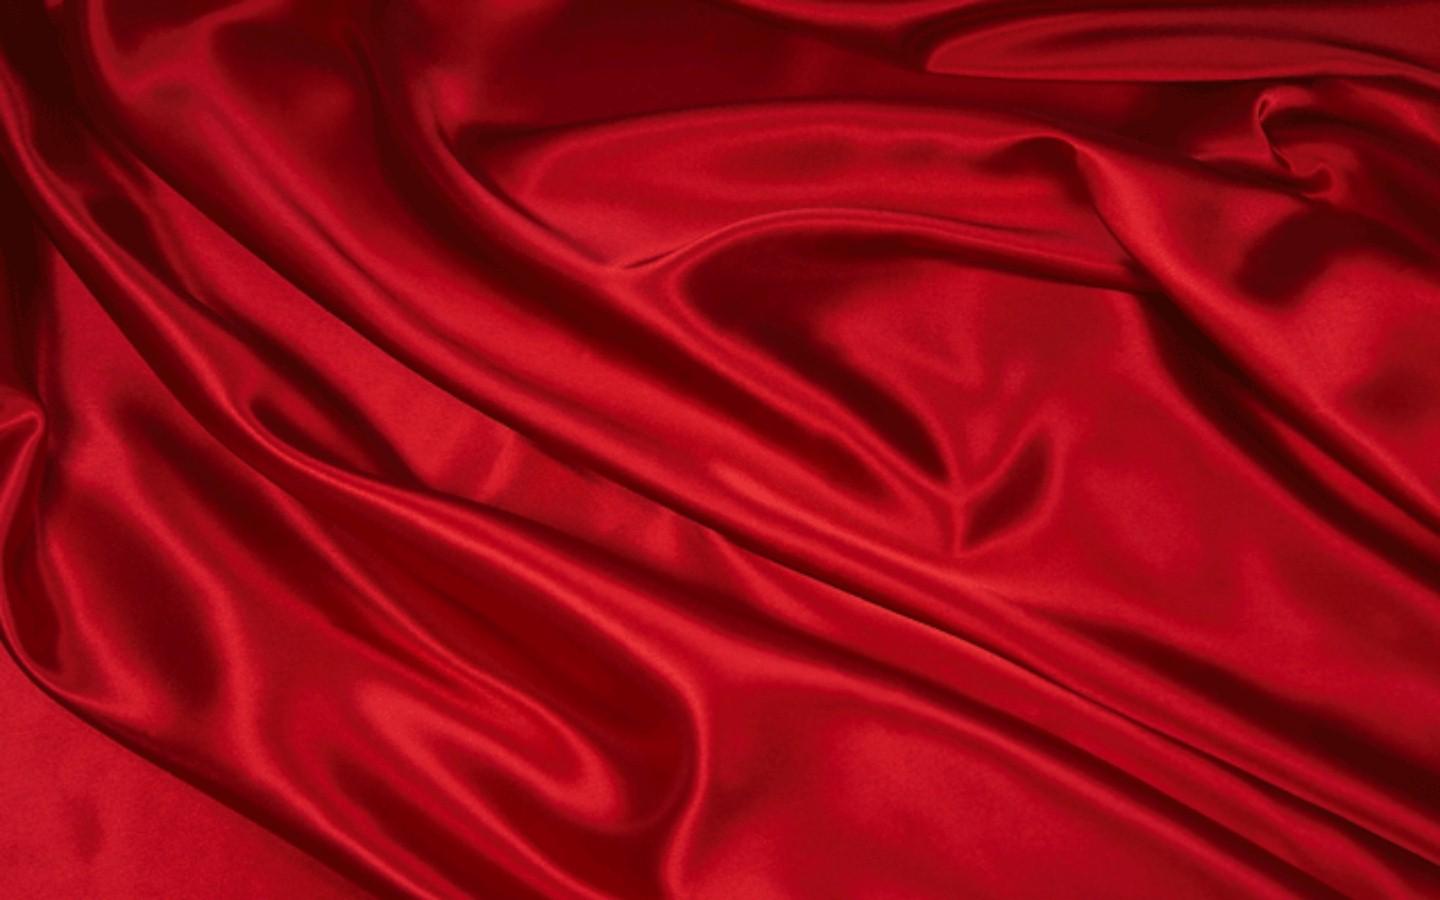 Red Silk High Quality And Resolution Wallpaper On